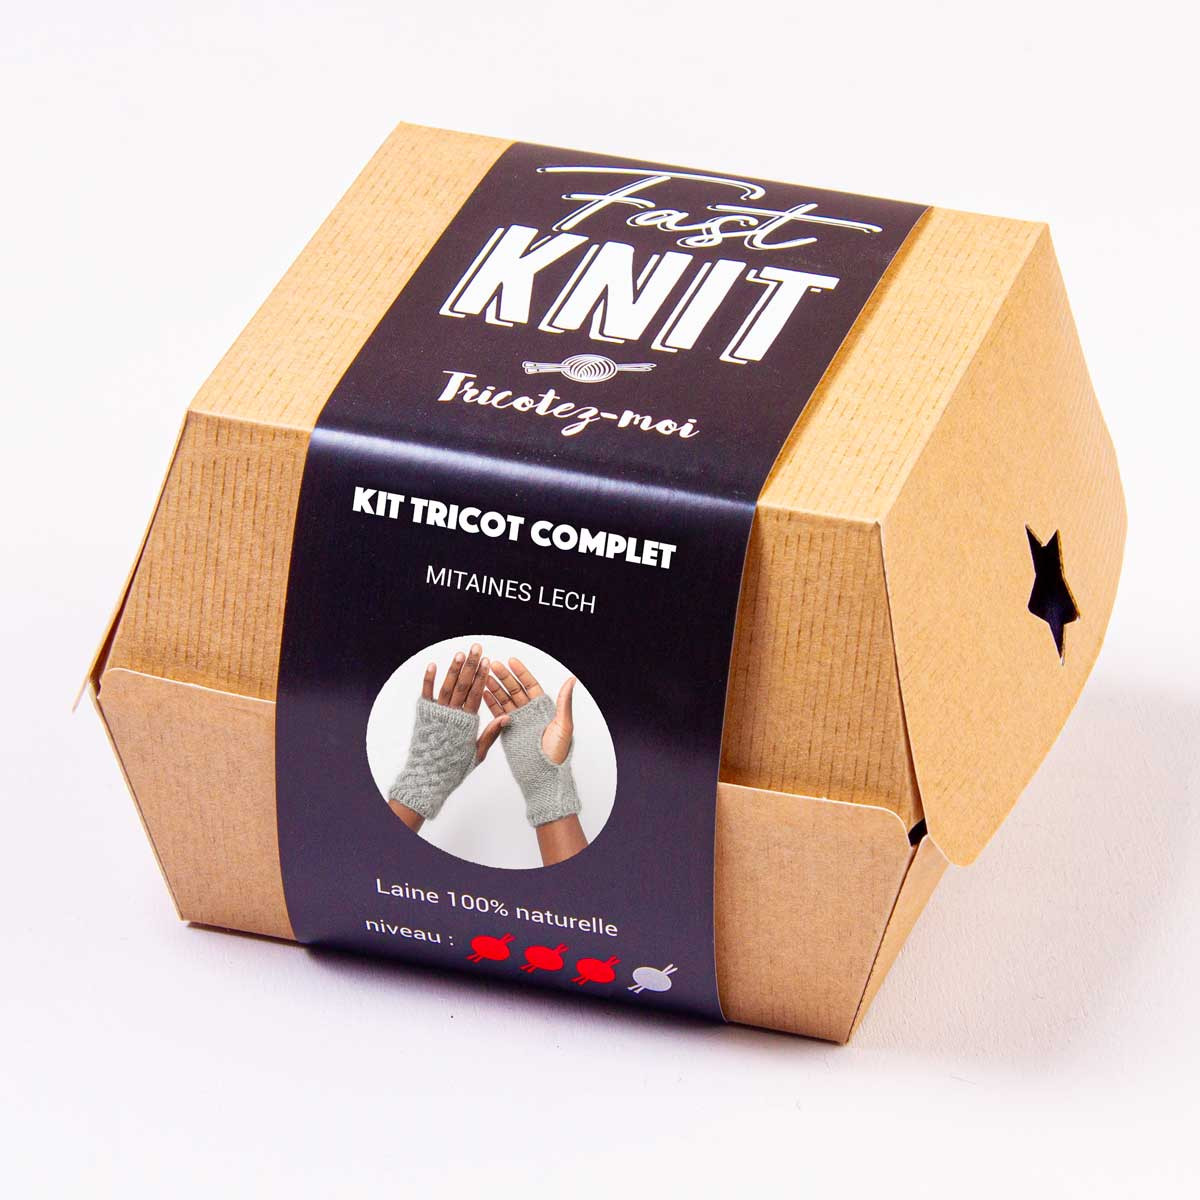 Mitaines Lech - Fast Knit Box tricot